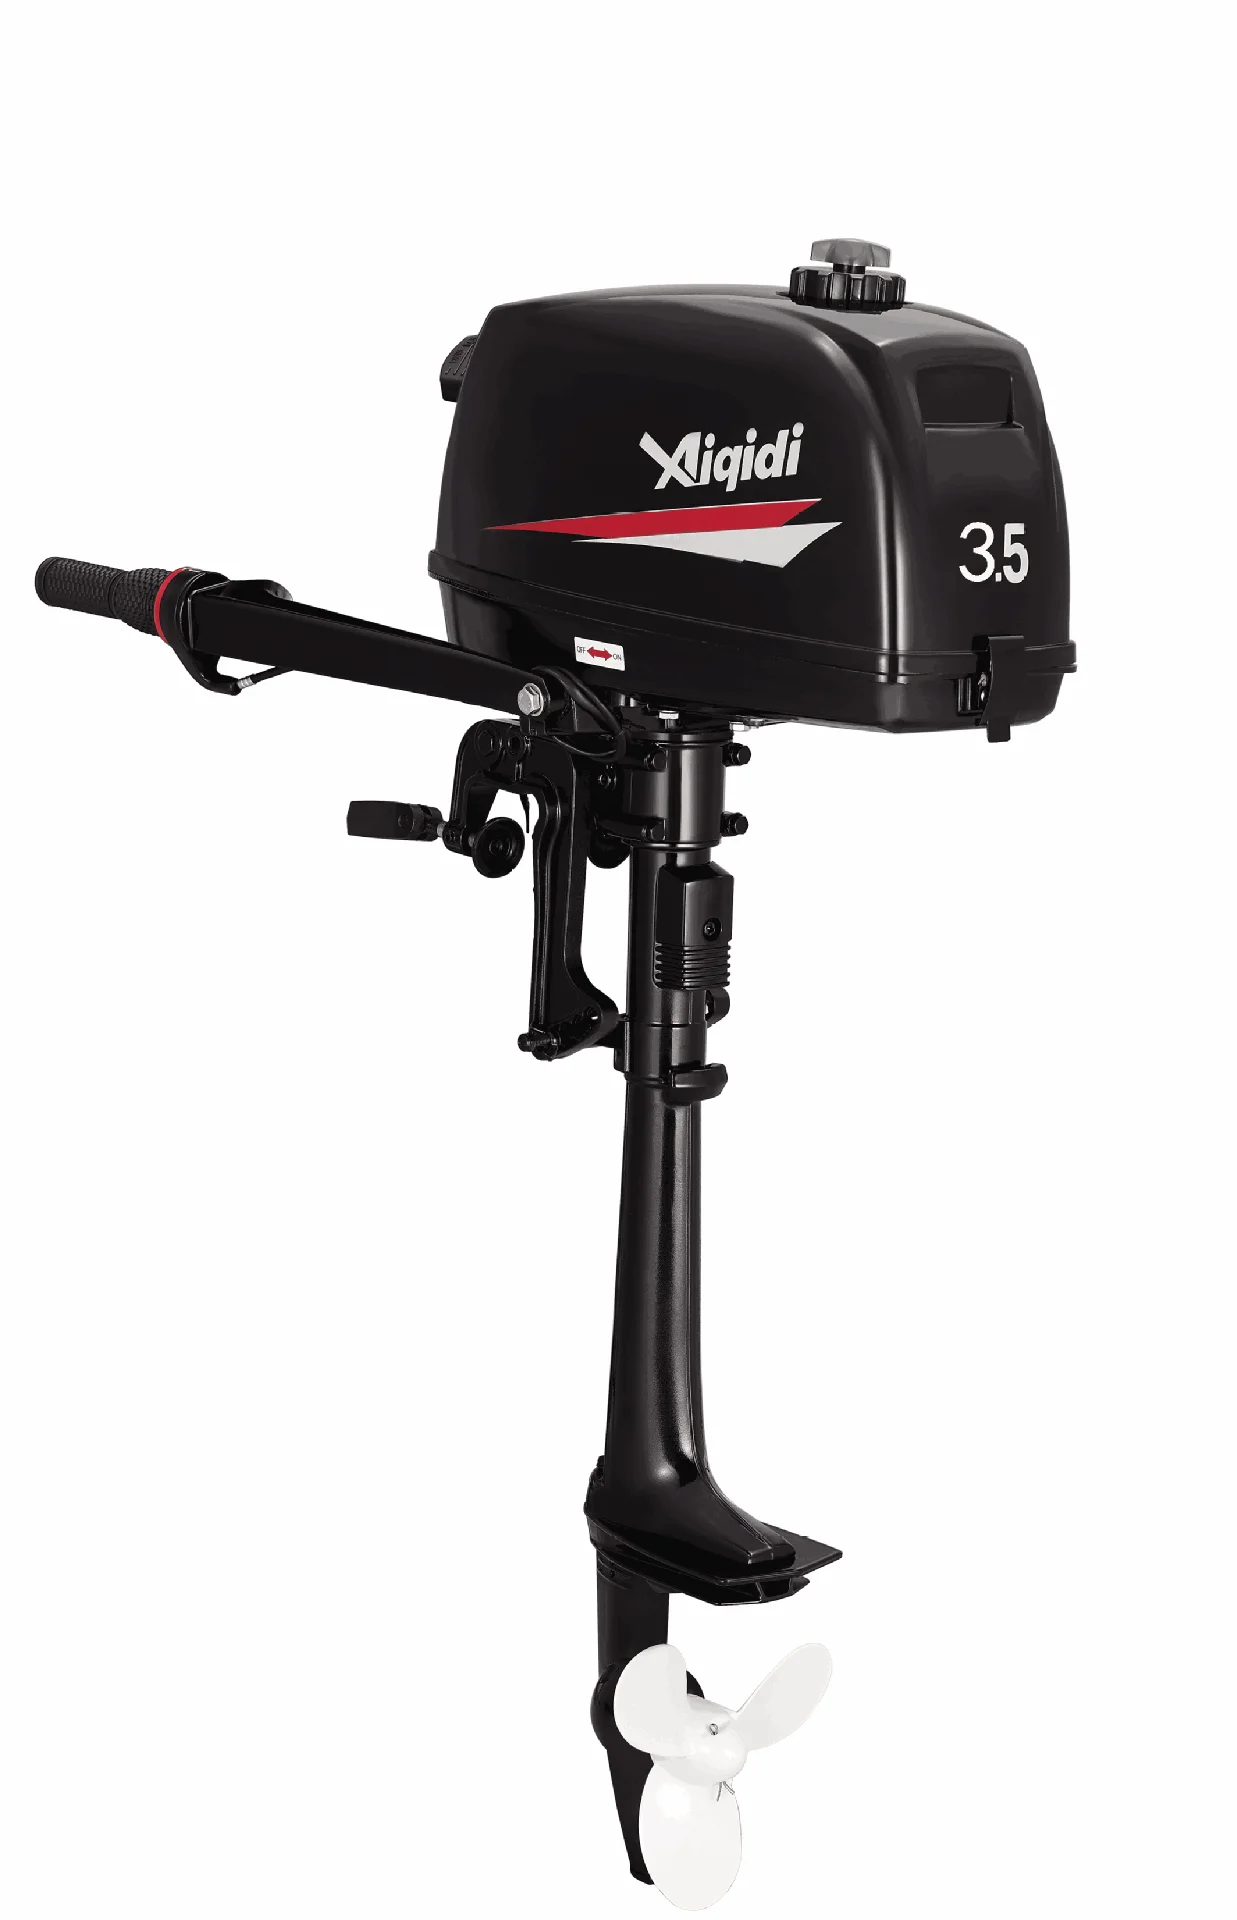 

New Arrive Aiqidi 2 Stroke 3.5 HP Water Cooled Gasoline Outboard Motor/ Outboard Motors/Rubber Boat Power Marine Engine